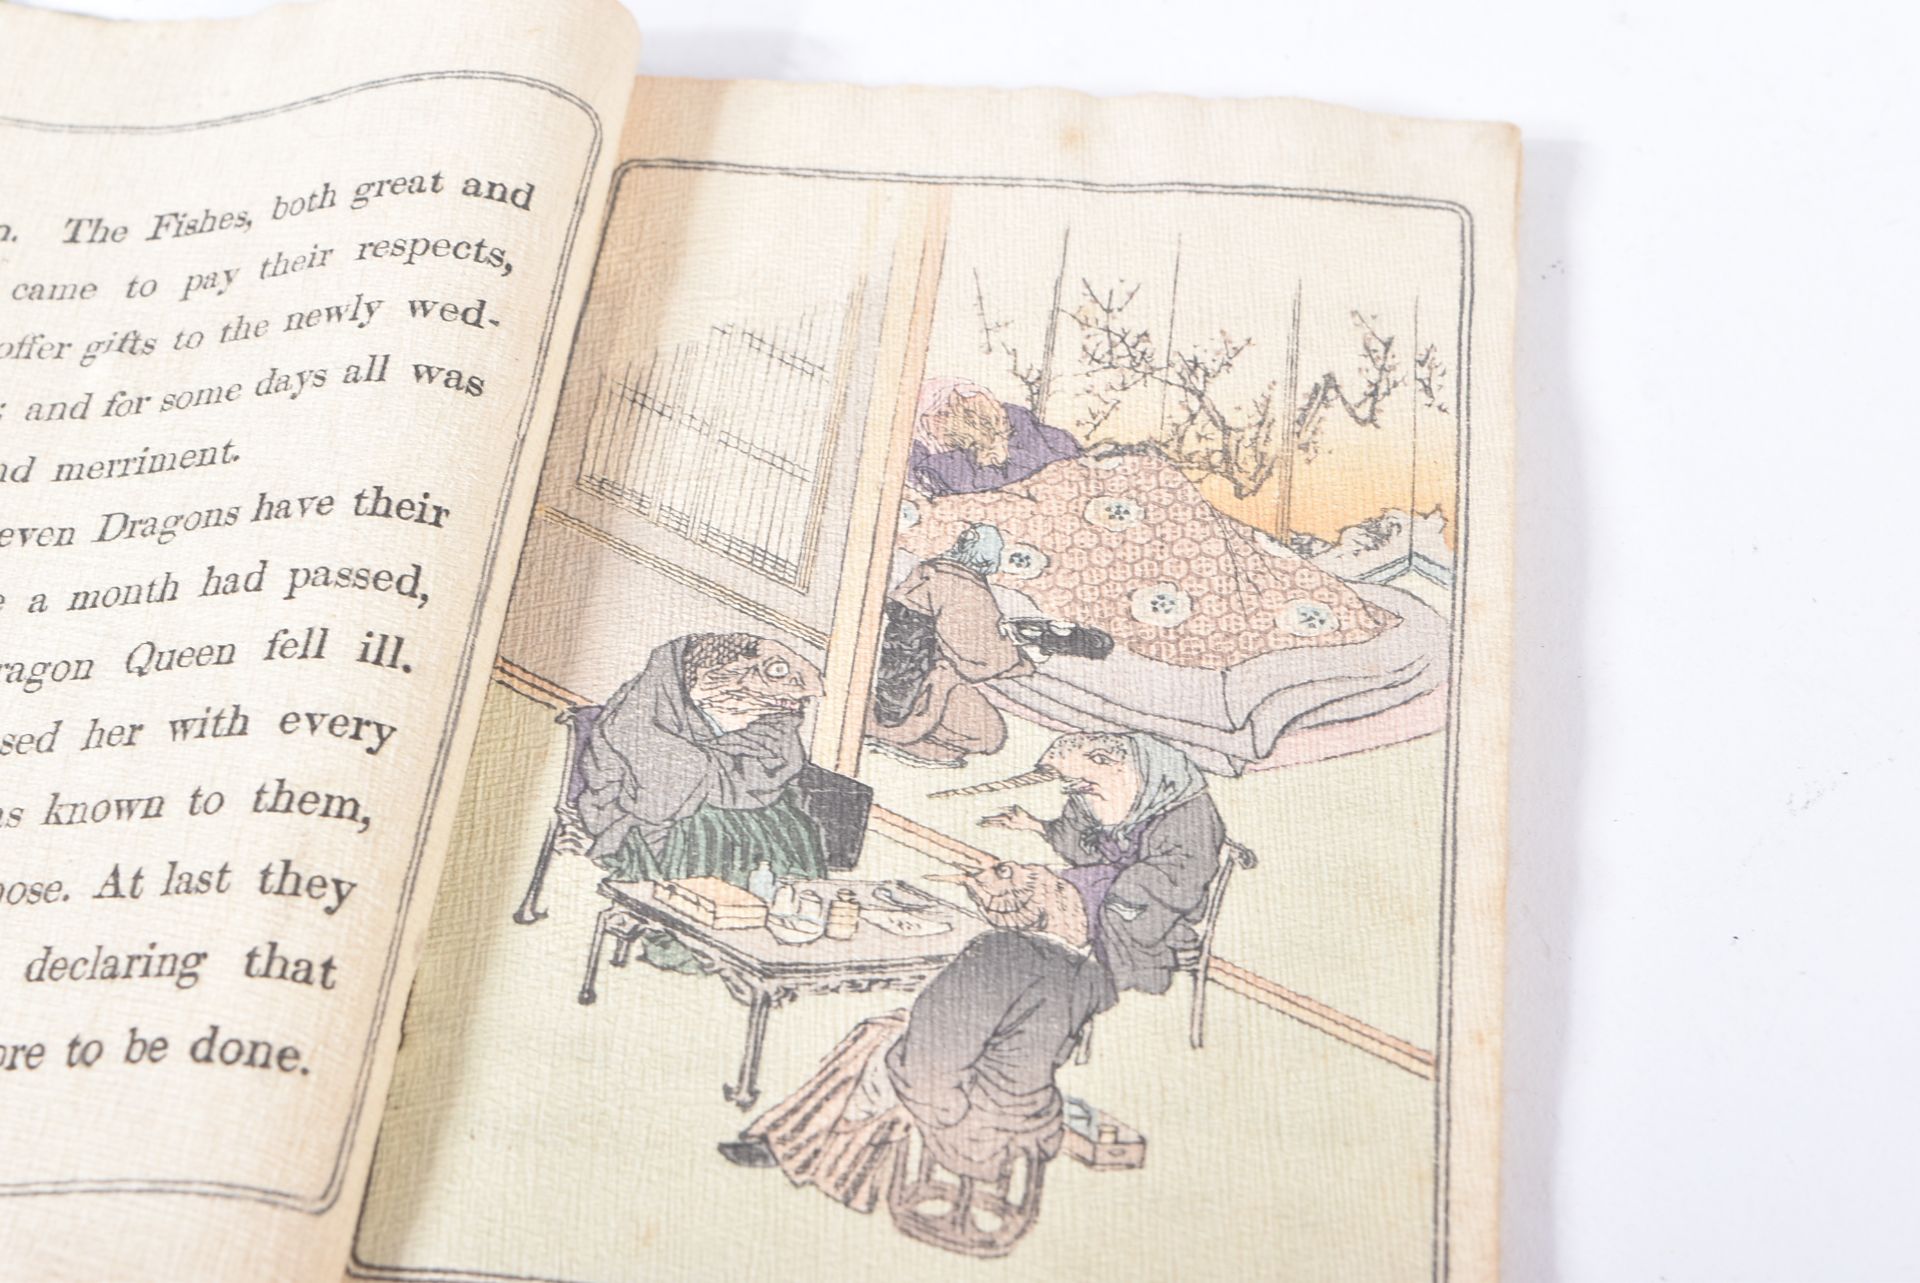 EARLY 19TH CENTURY JAPANESE FAIRY TALE SERIES ' THE SILLY JELLY-FISH ' BOOK - Image 4 of 6